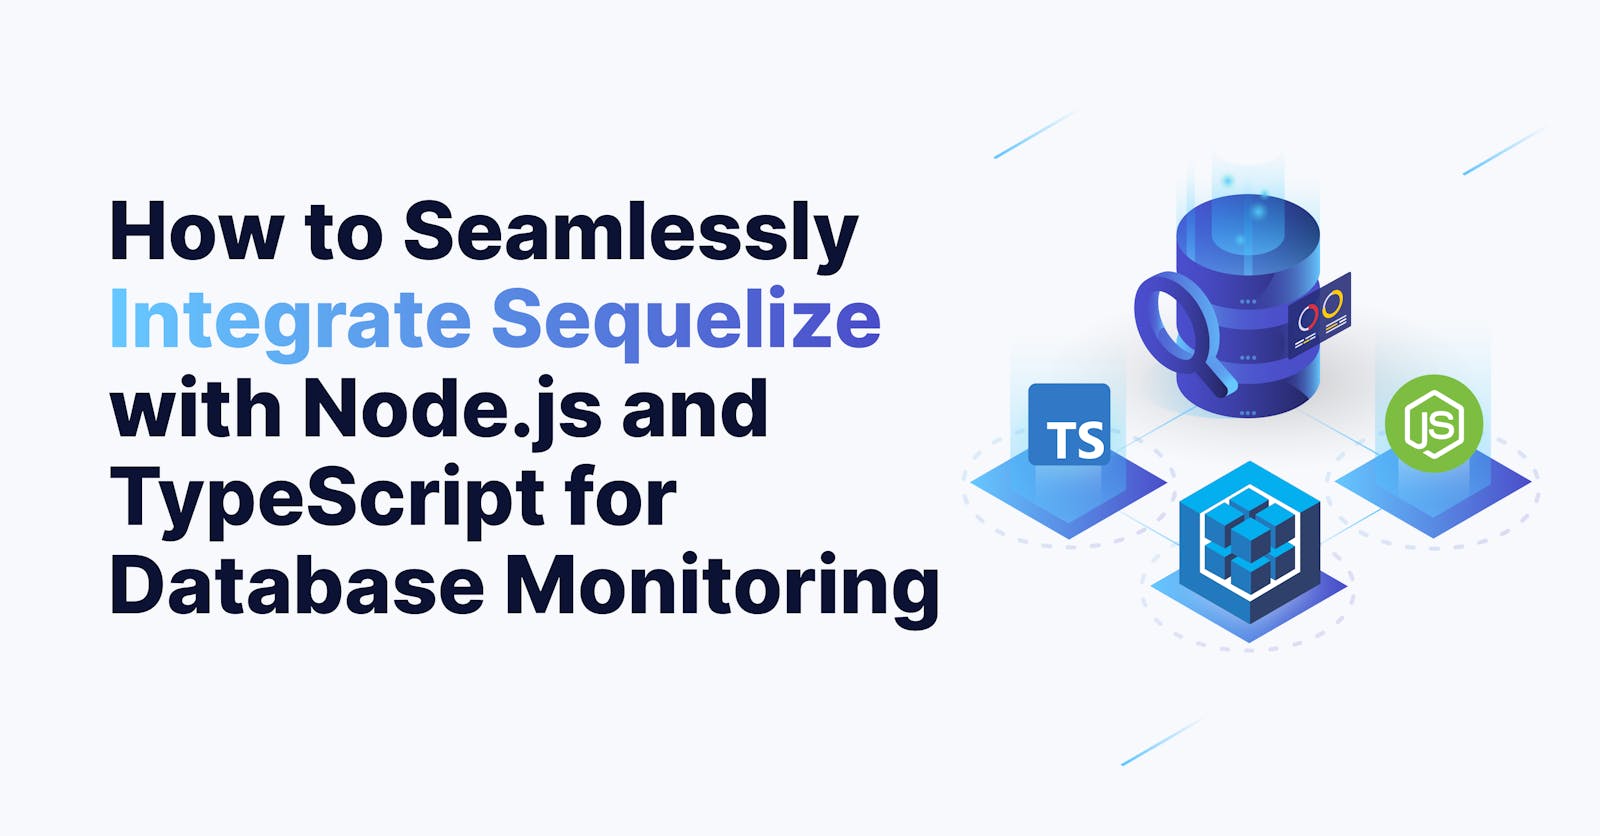 How To Seamlessly Integrate Sequelize with Node.js and JavaScript for Database Monitoring